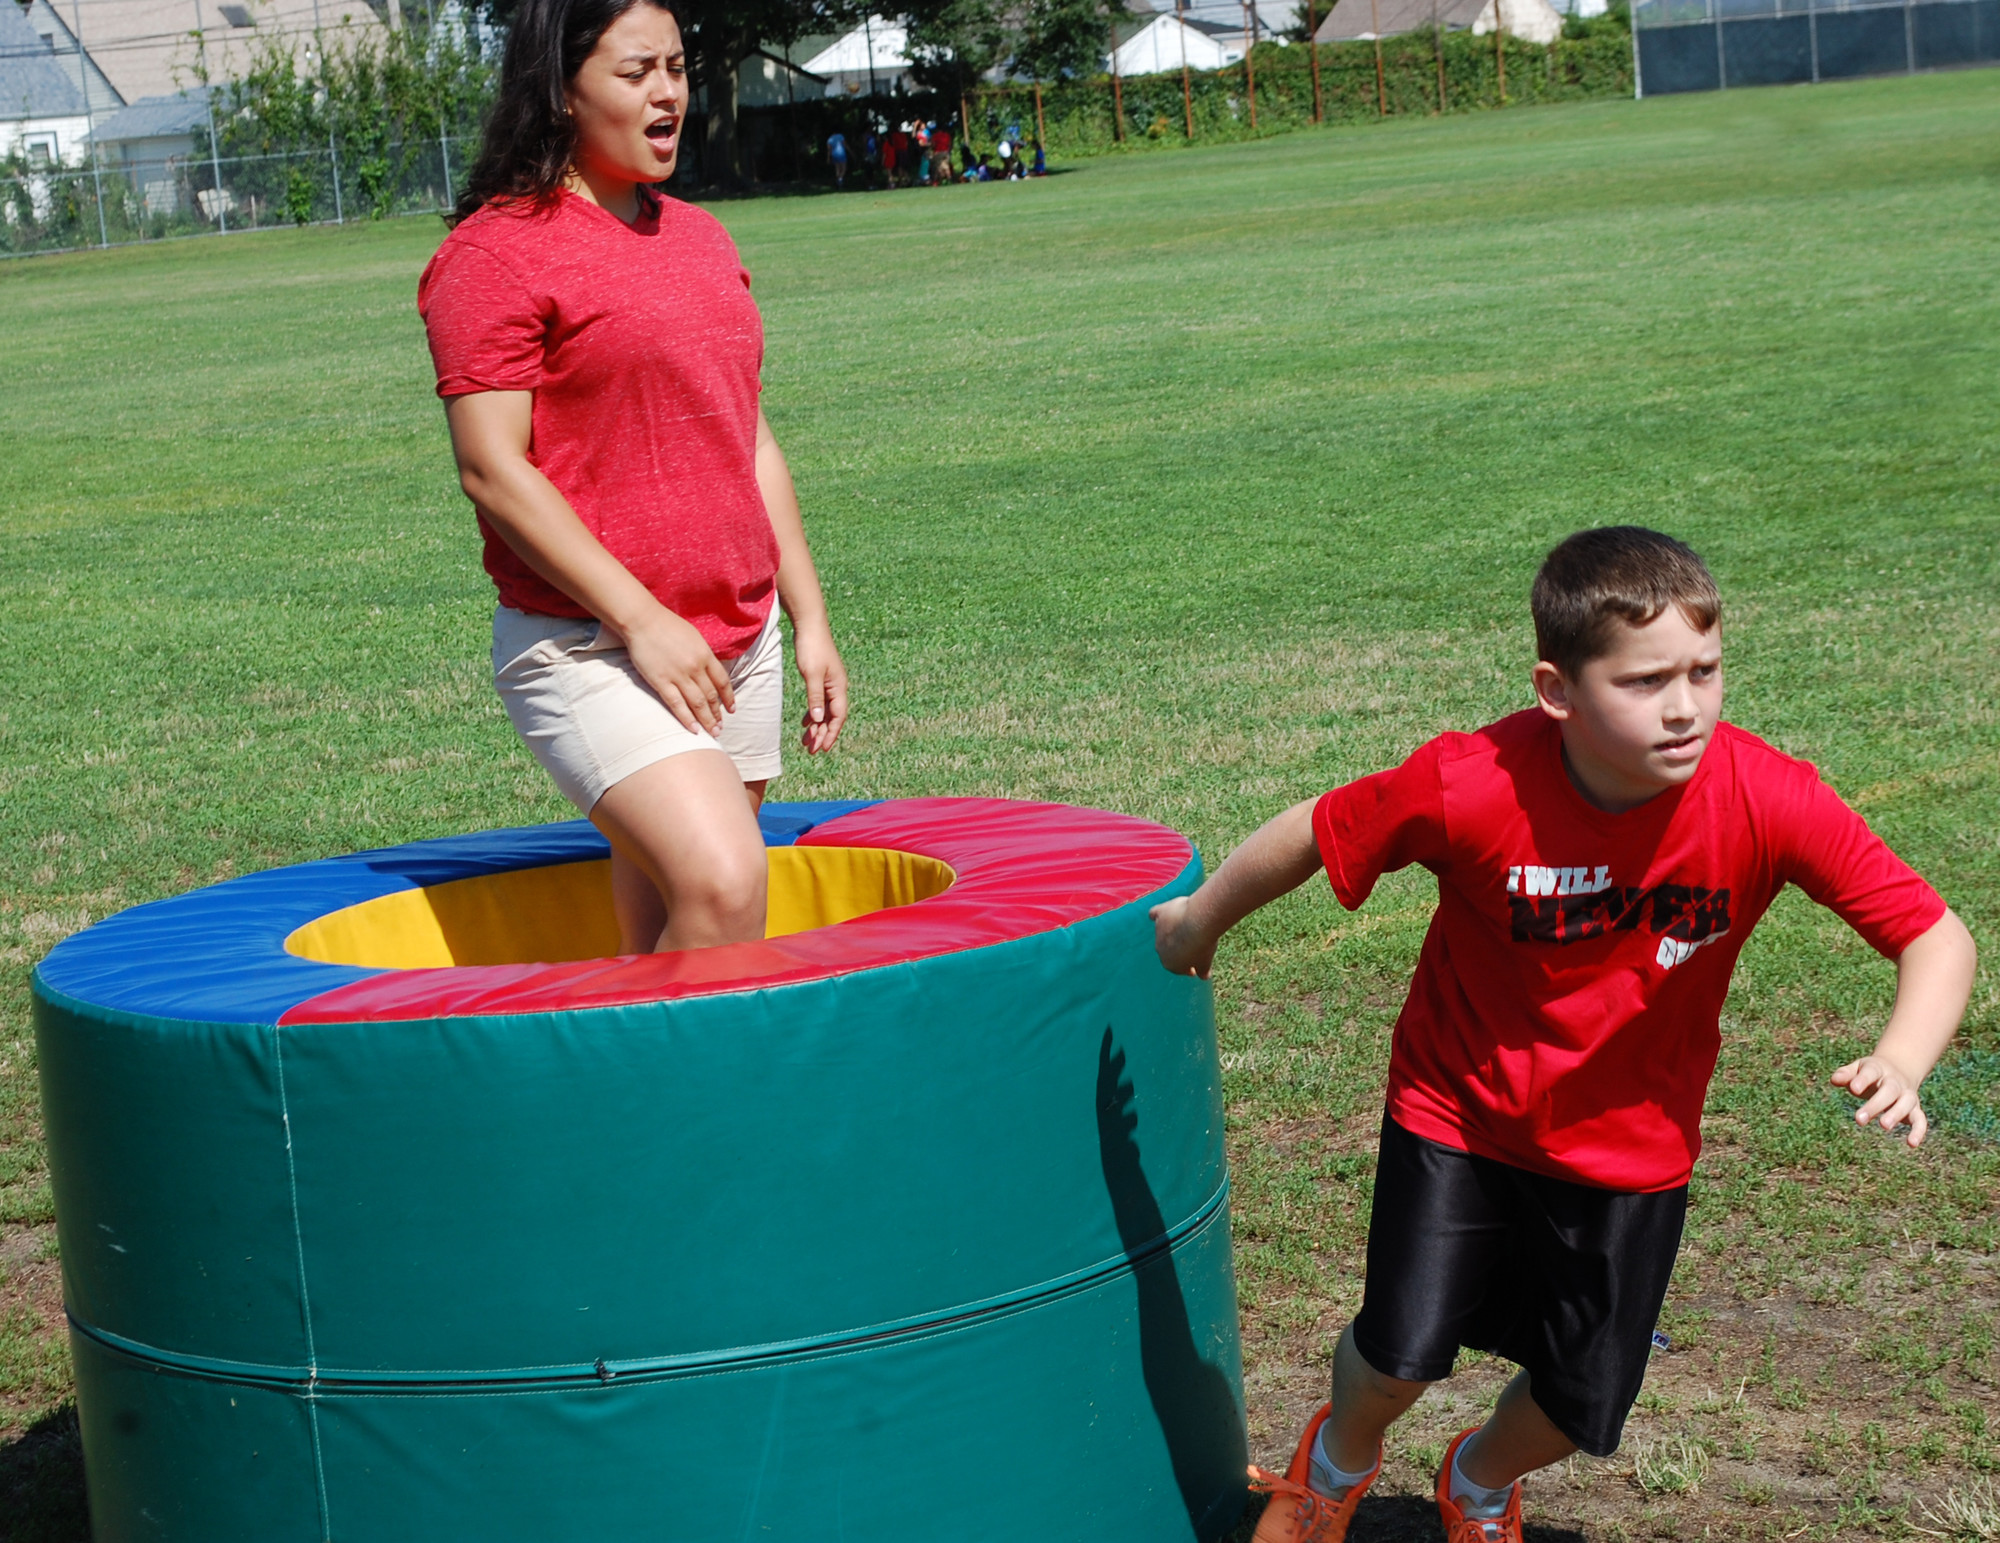 Christian Bolognese made the turn to head through the second leg of the obstacle course as counselor Brianna Fortiz cheered him on.